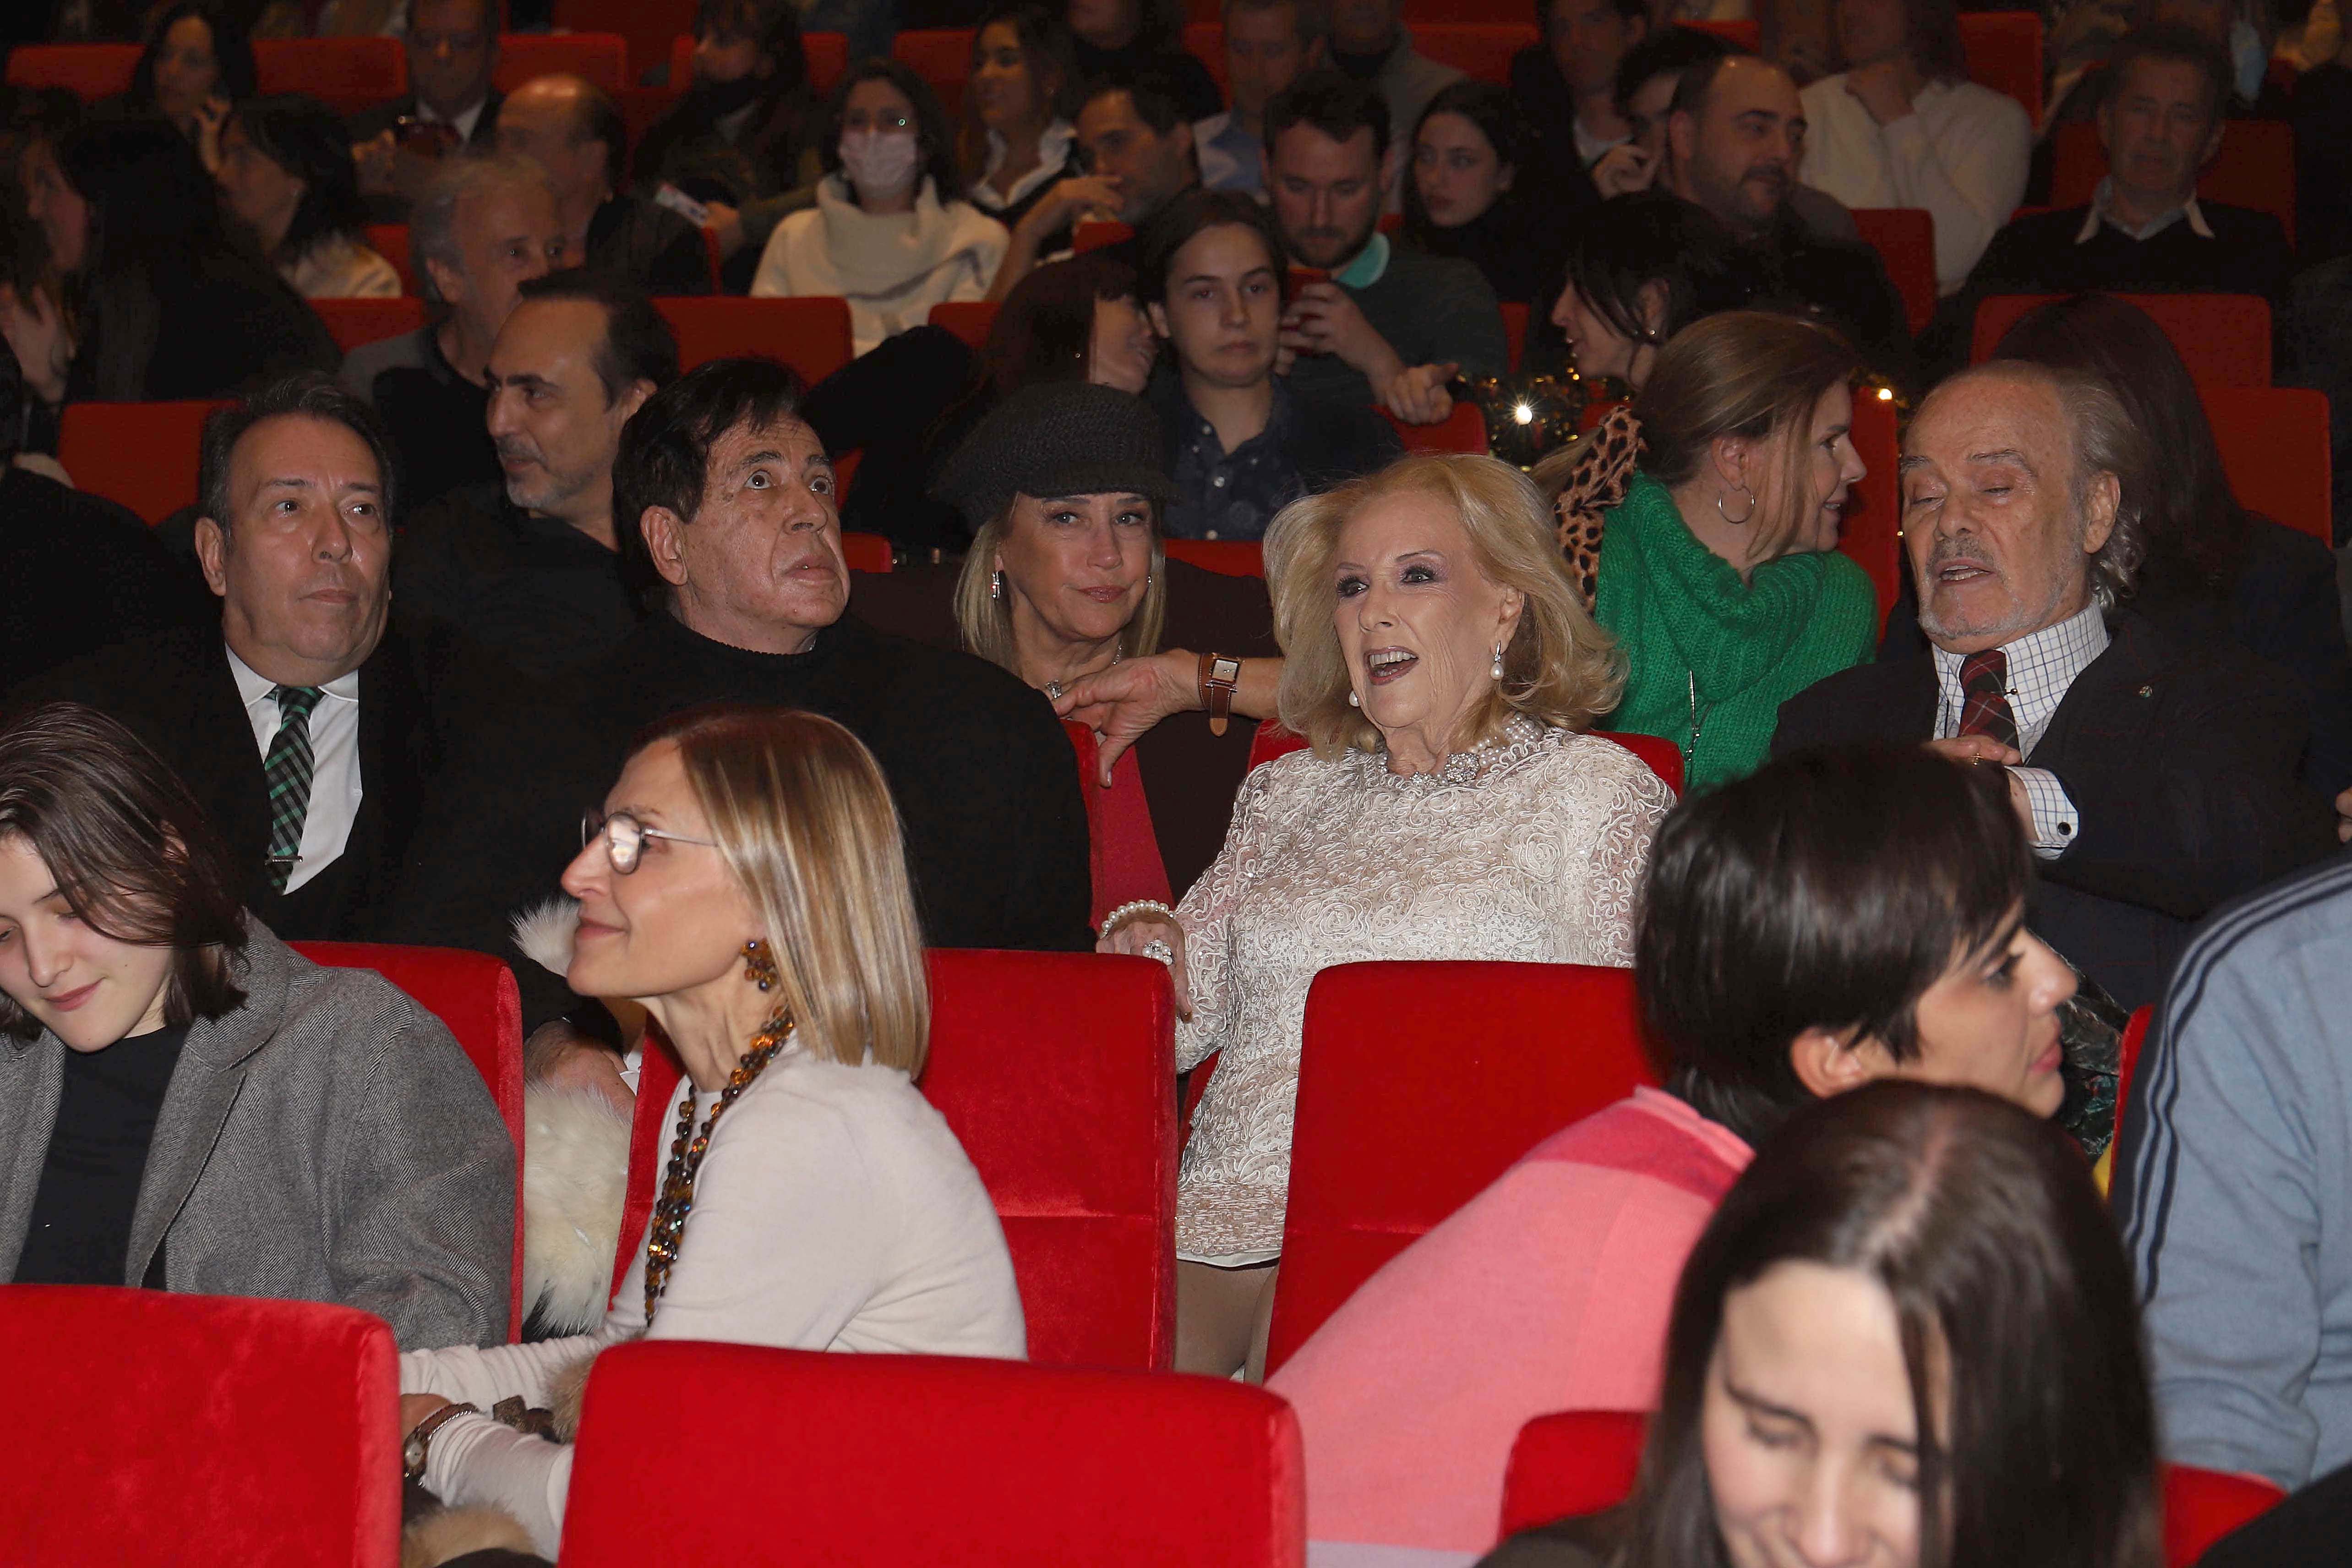 Mirtha Legrand enjoyed the inauguration from a preferential location